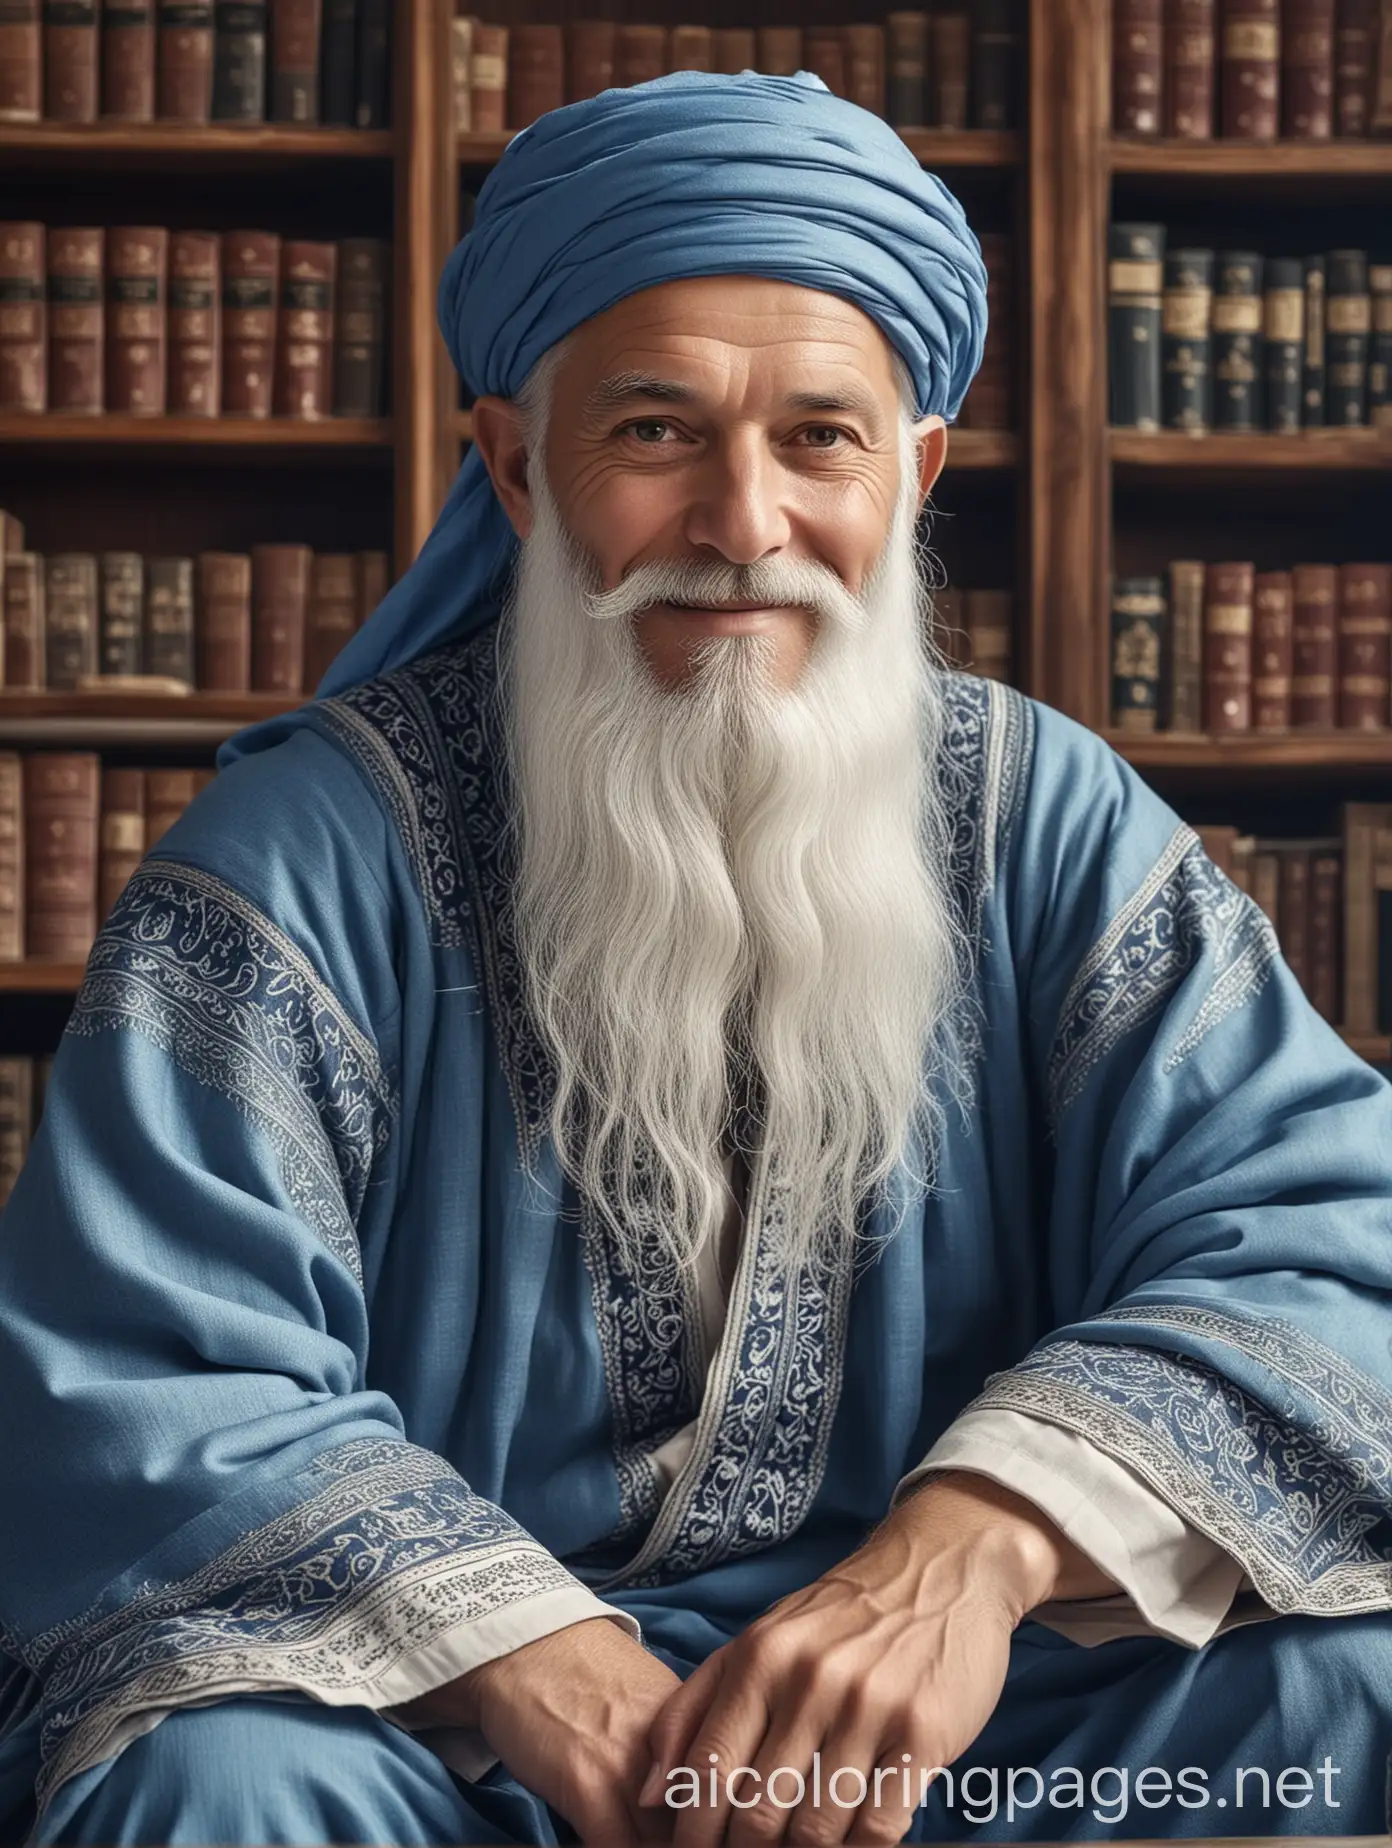 Middleaged-Islamic-Scholar-Smiling-in-Vintage-Library-Portrait